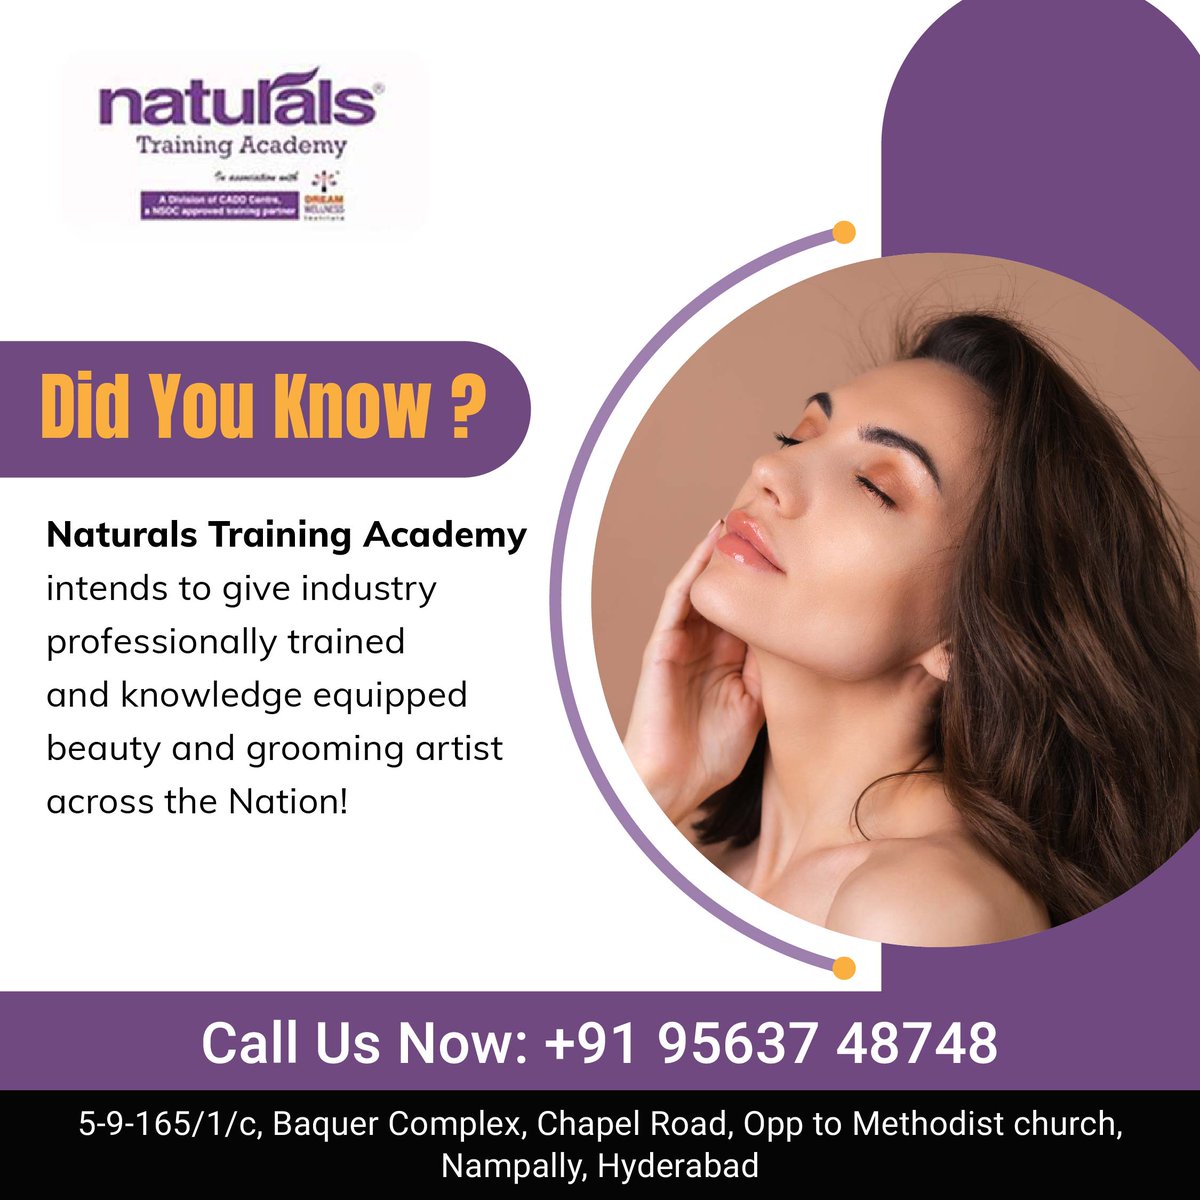 Discover the difference with Naturals Training Academy – your gateway to industry-professional beauty and grooming expertise nationwide. Contact Us: 95637 48748 visit : naturalsacademy.com #beautytraining #groomingartist #naturalstrainingacademy #nta #nampally #hyderabad